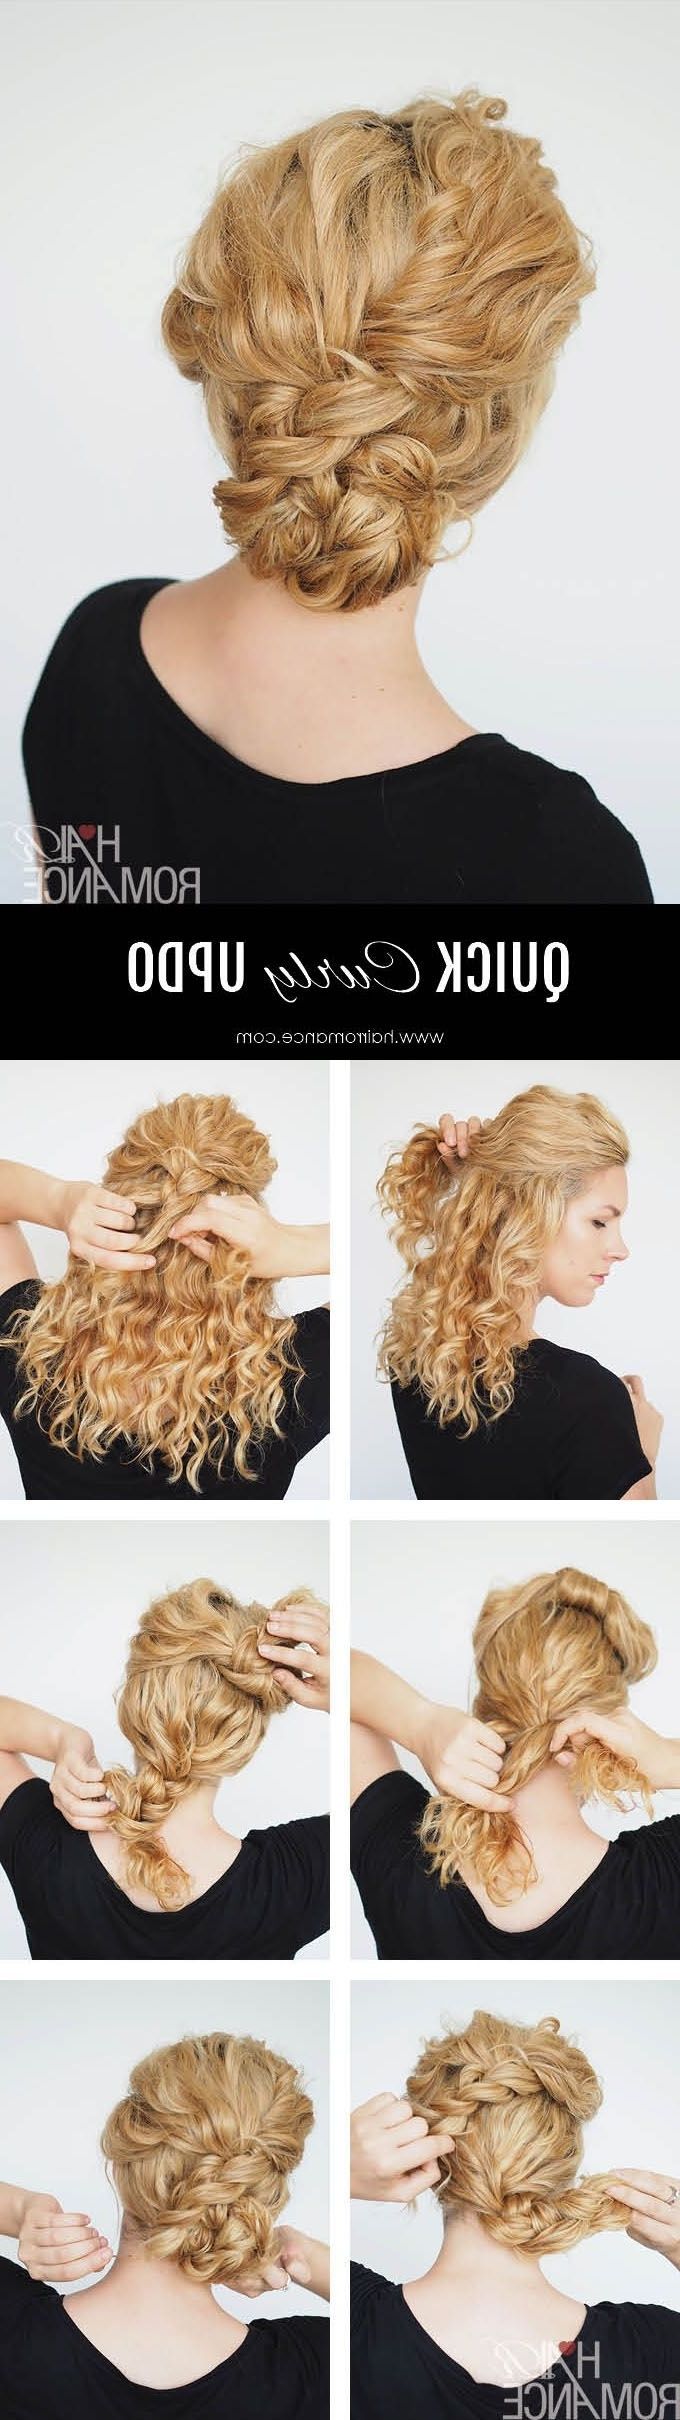 2 Min Updo For Curly Hair (hair Romance) | Updo, Curly And Romance With Regard To Hair Updos For Curly Hair (View 15 of 15)